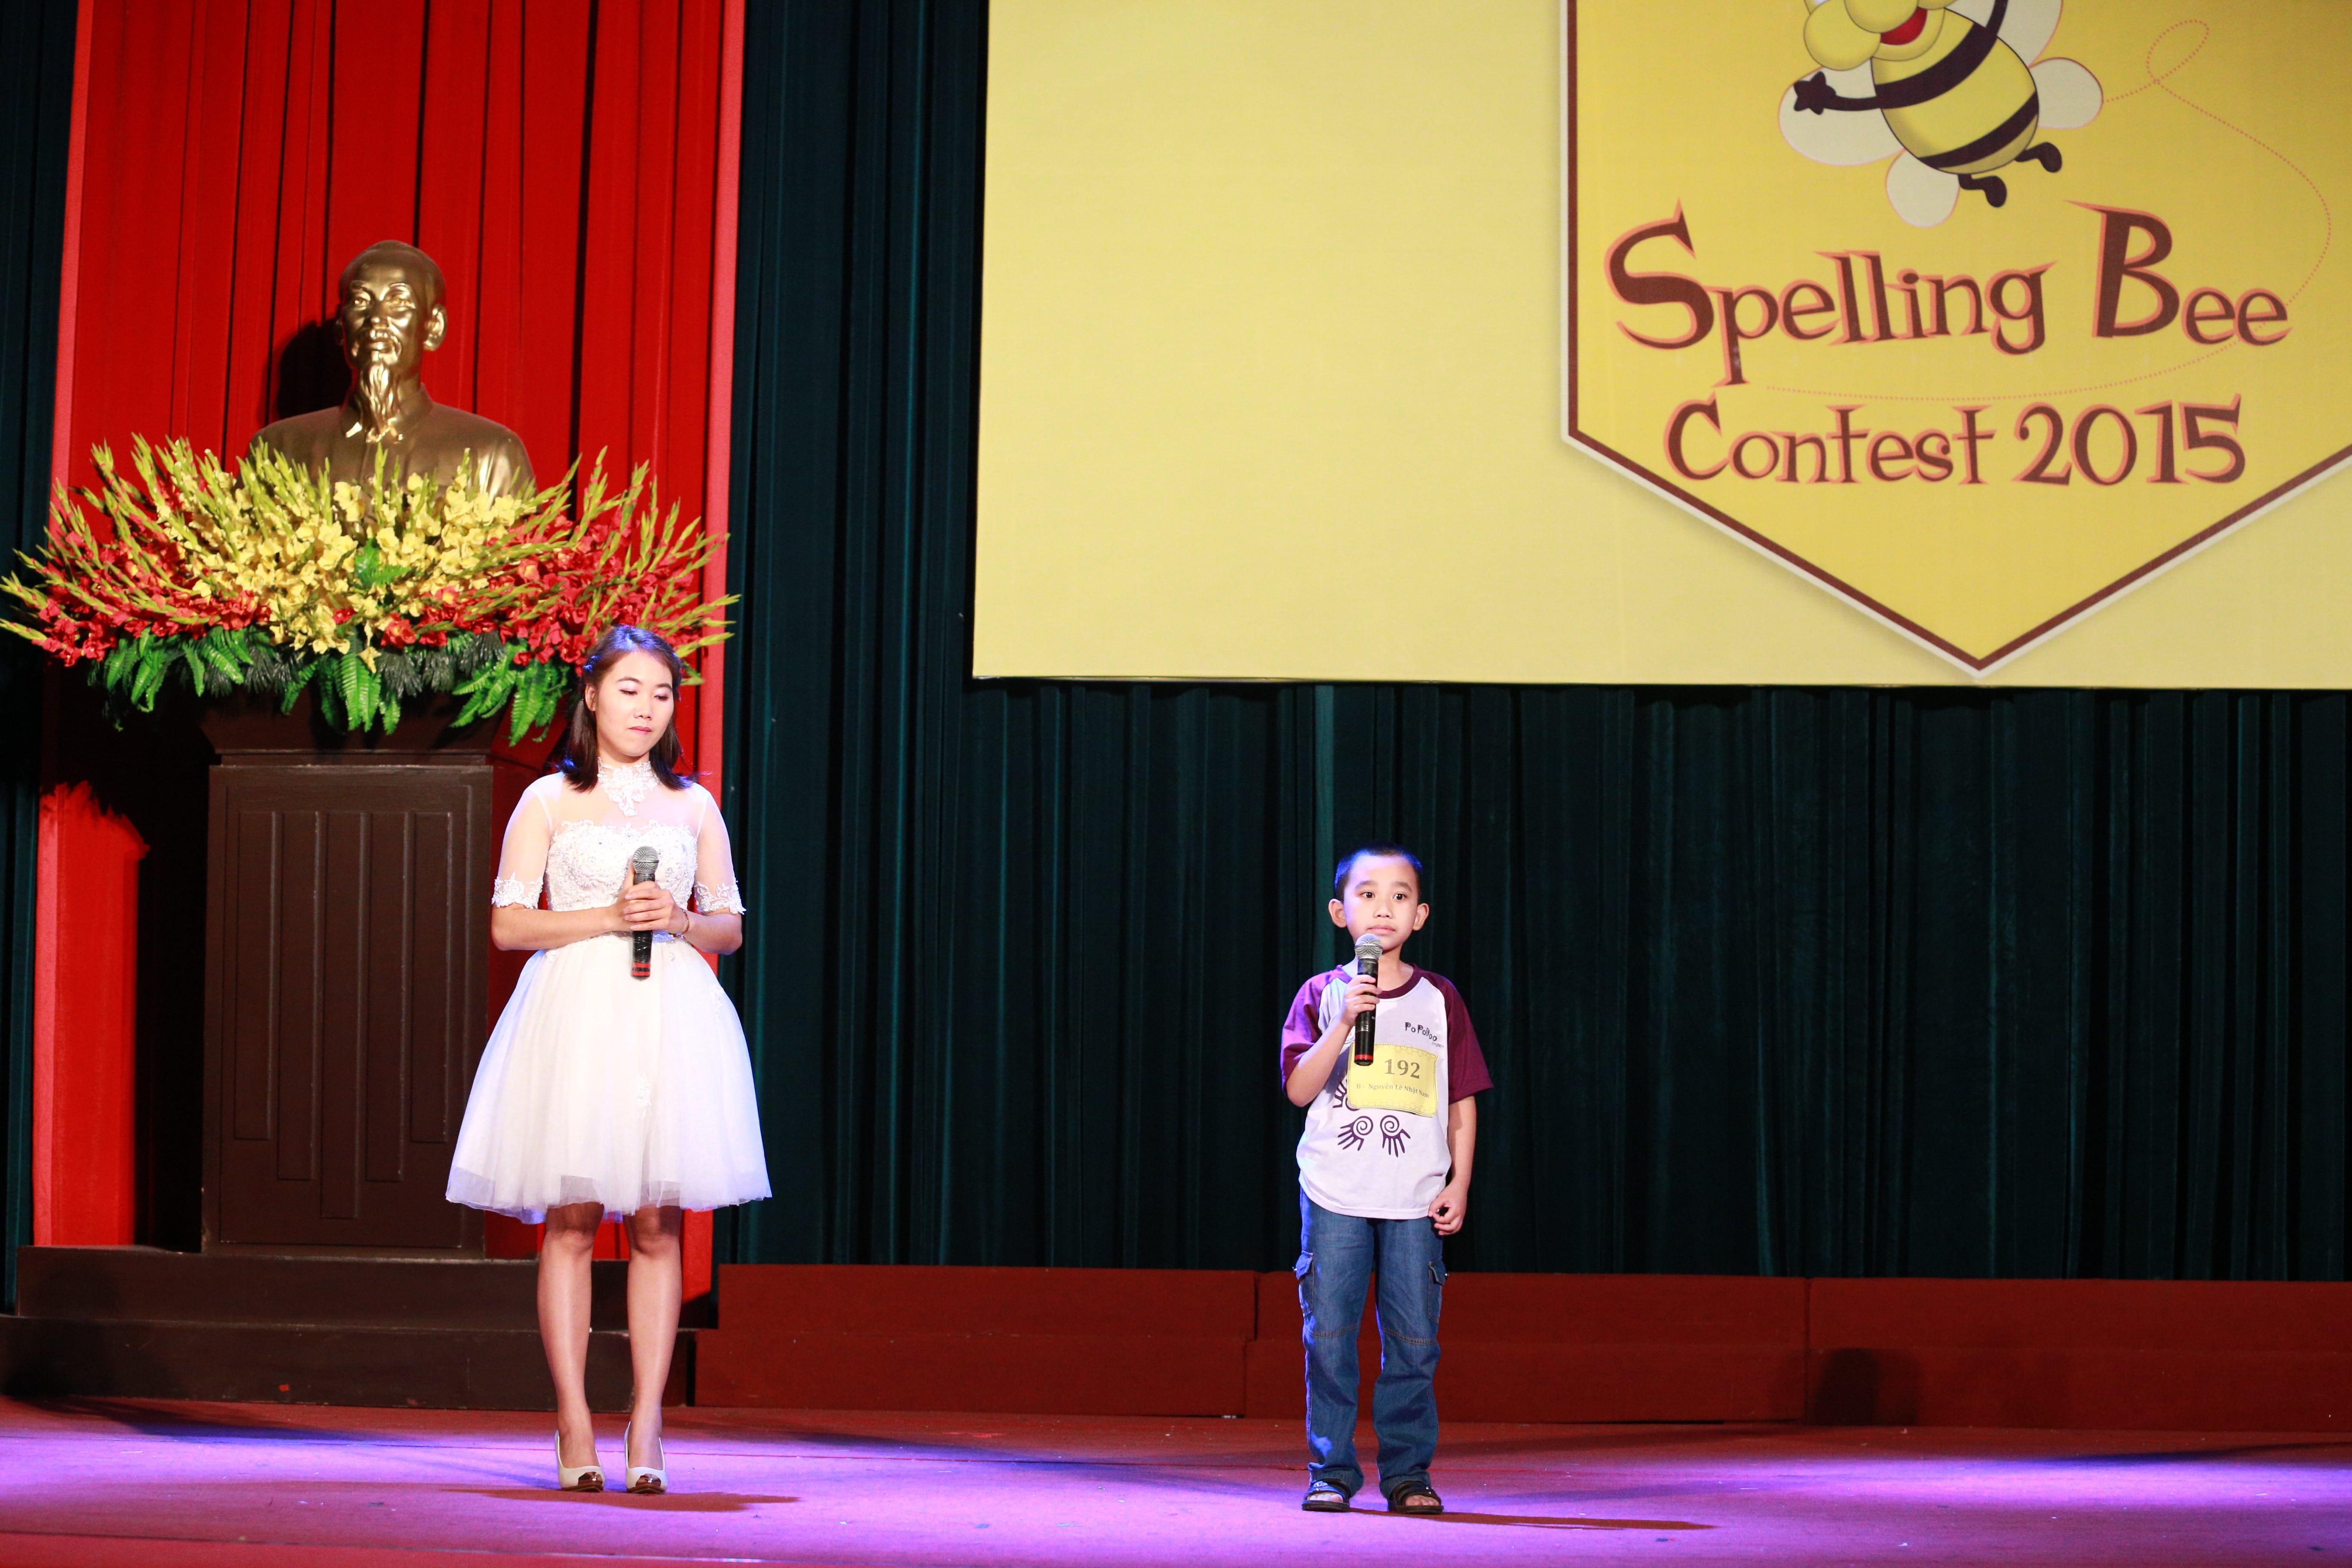 Throwback our Spelling Bee Contest 2015 Champions - Level B